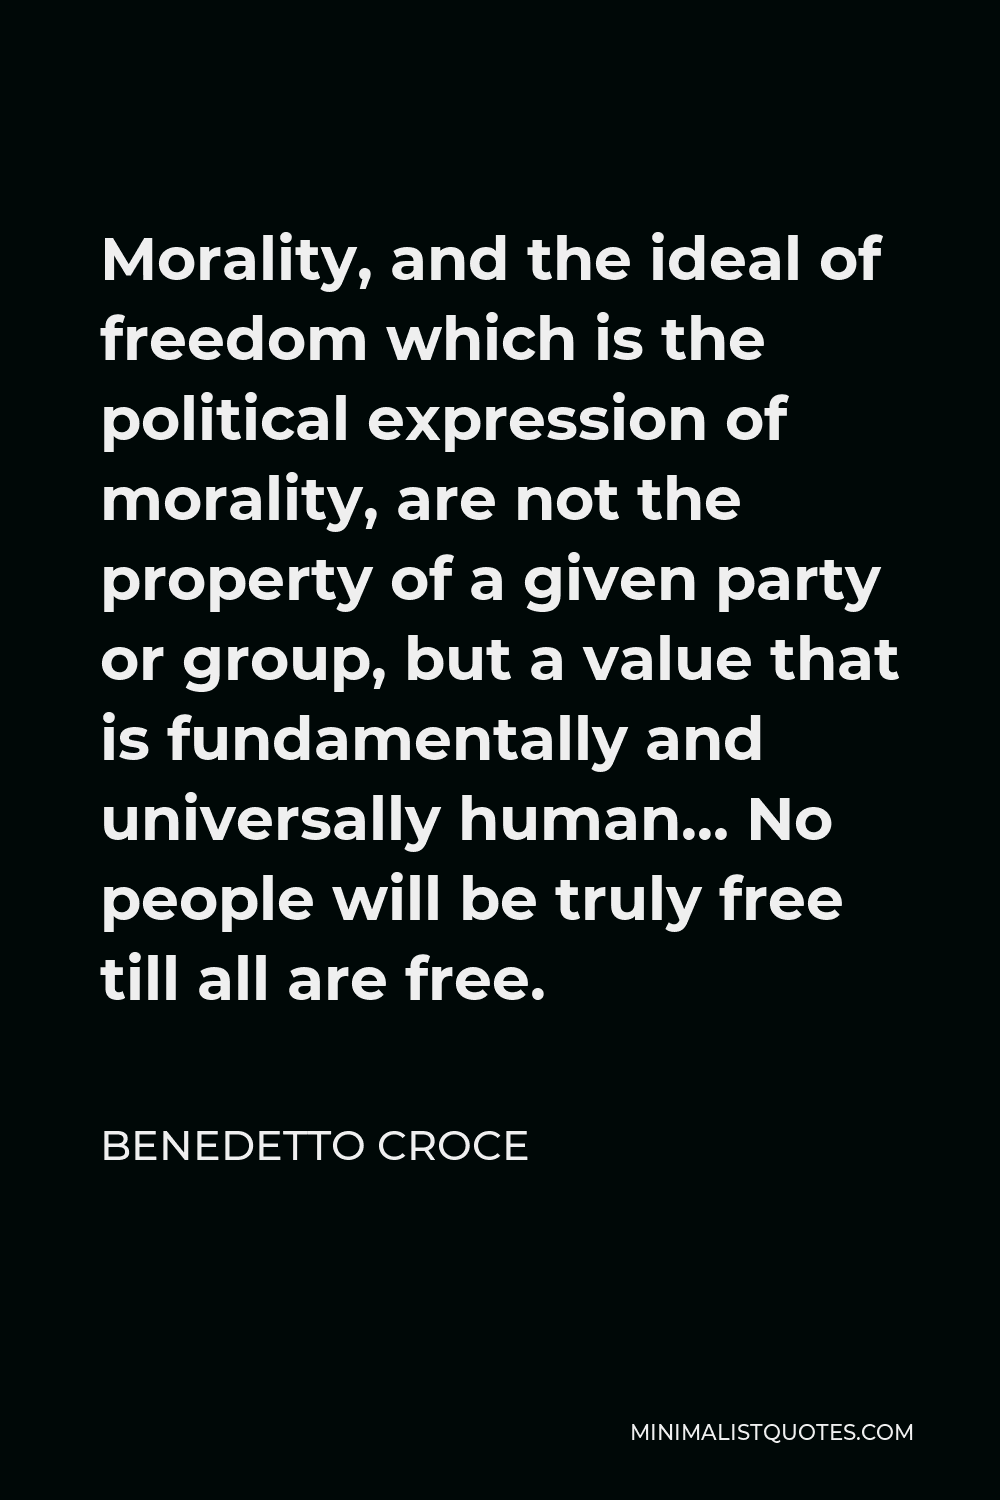 Benedetto Croce Quote - Morality, and the ideal of freedom which is the political expression of morality, are not the property of a given party or group, but a value that is fundamentally and universally human… No people will be truly free till all are free.